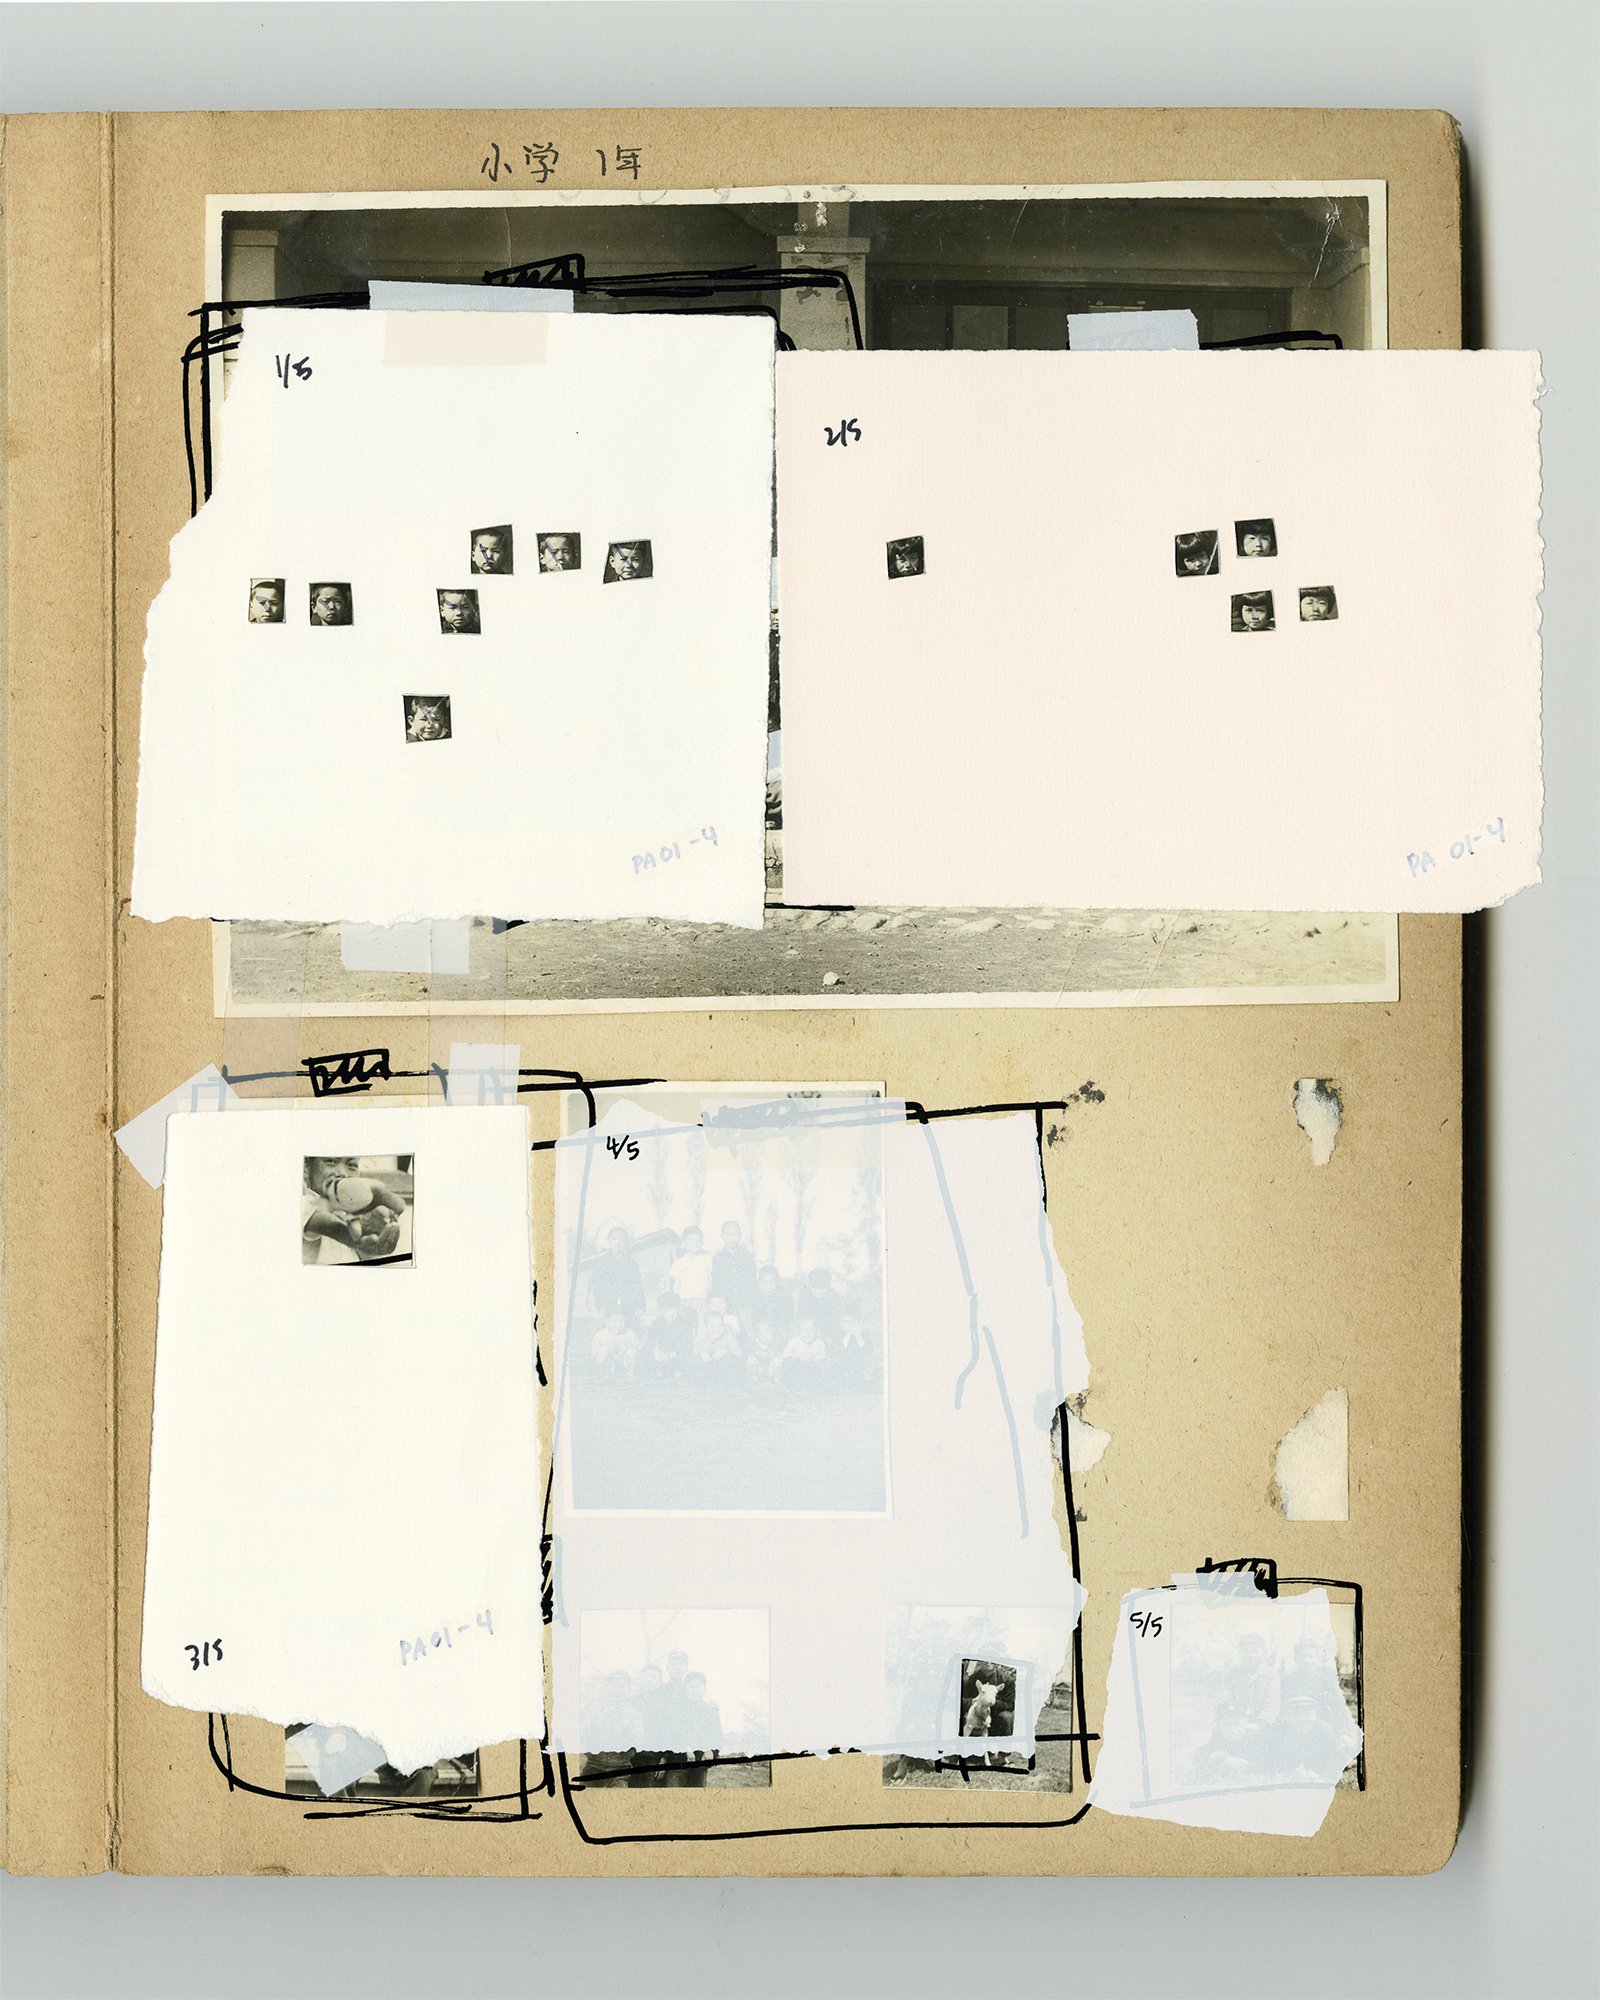   Photo Album 01-05 , 2019, silkscreen and collage on pigment print, 20x16 inches. 